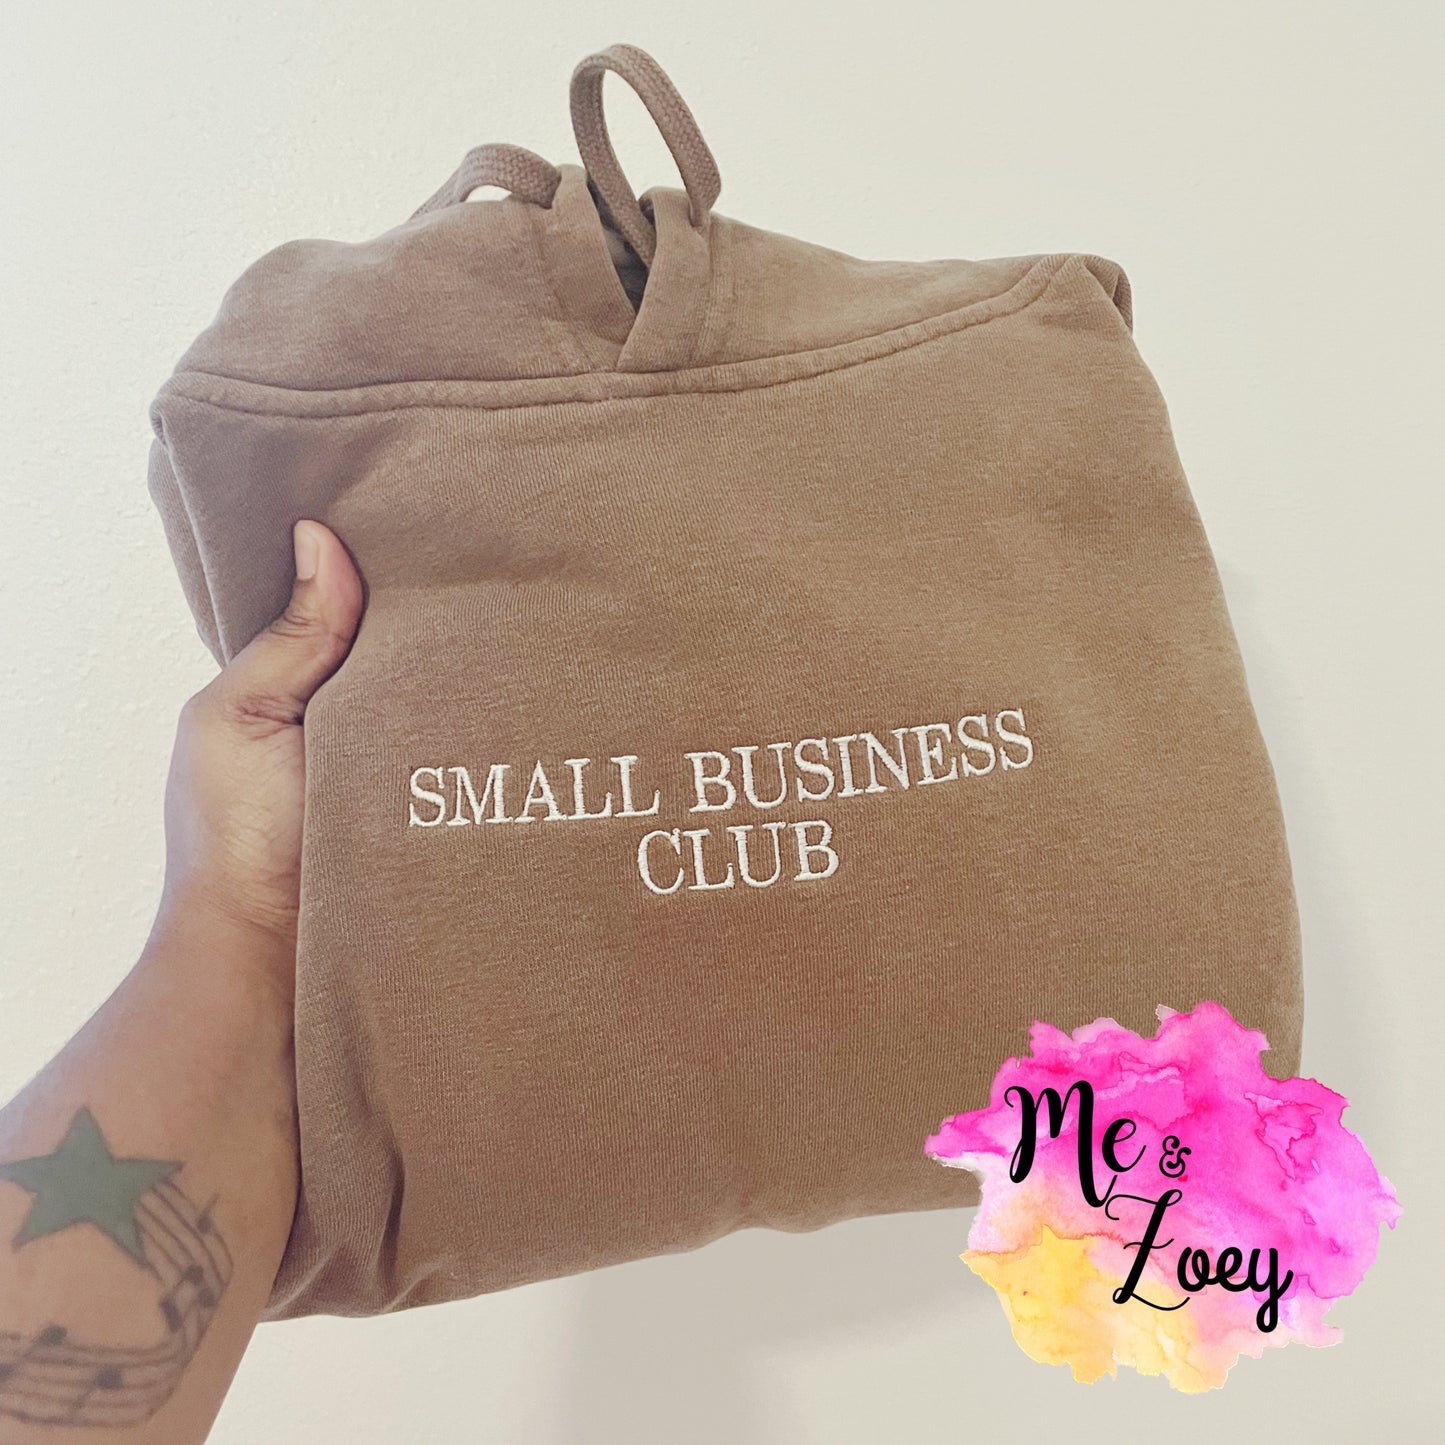 Small Business Club Embroidery - MeAndZoey